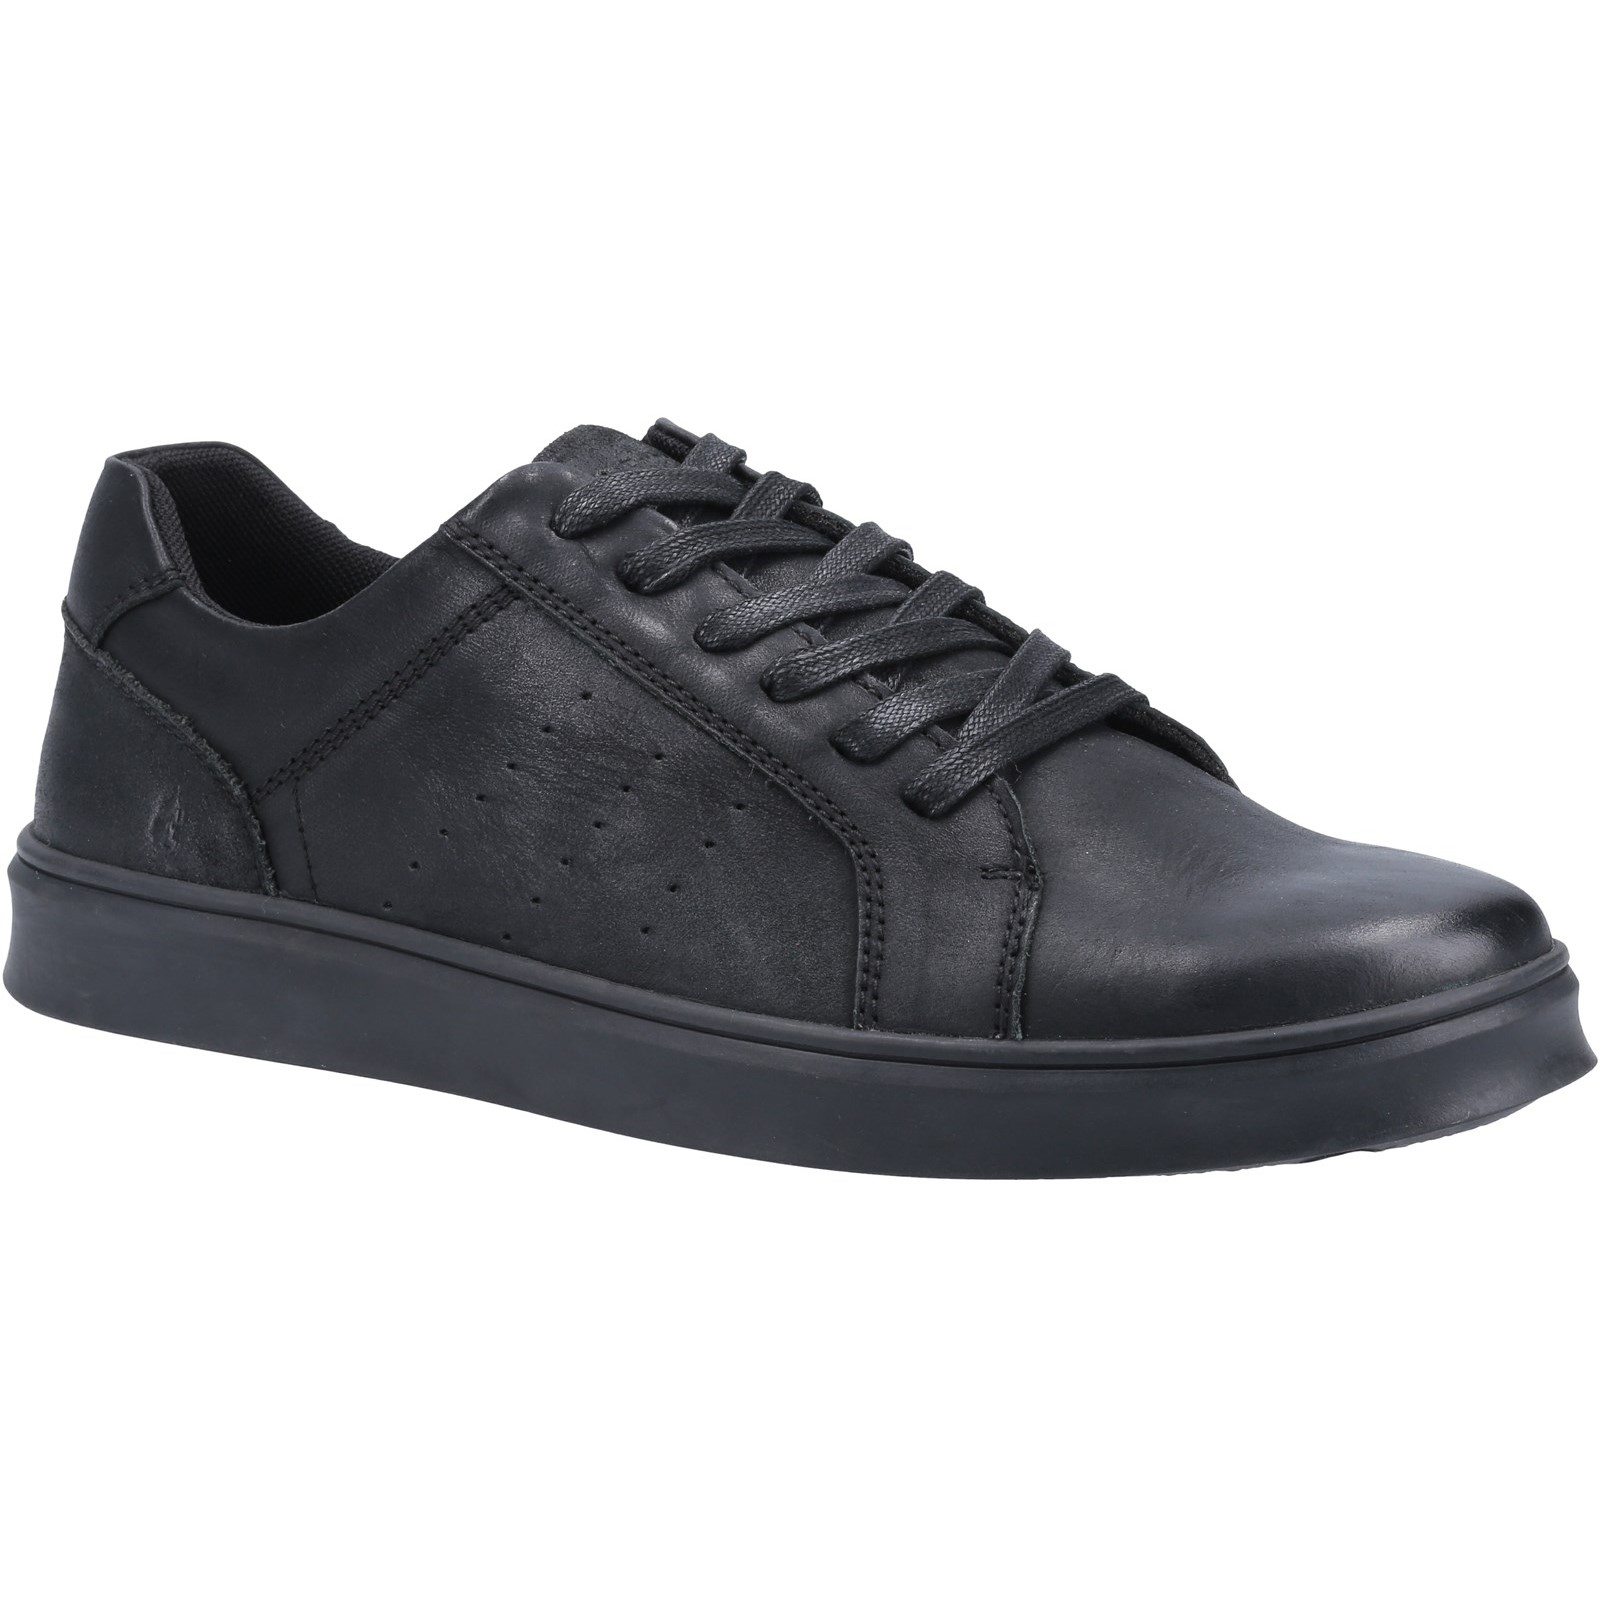 Hush Puppies Men's Mason Leather Lace Up Casual Trainers Shoes - UK 10